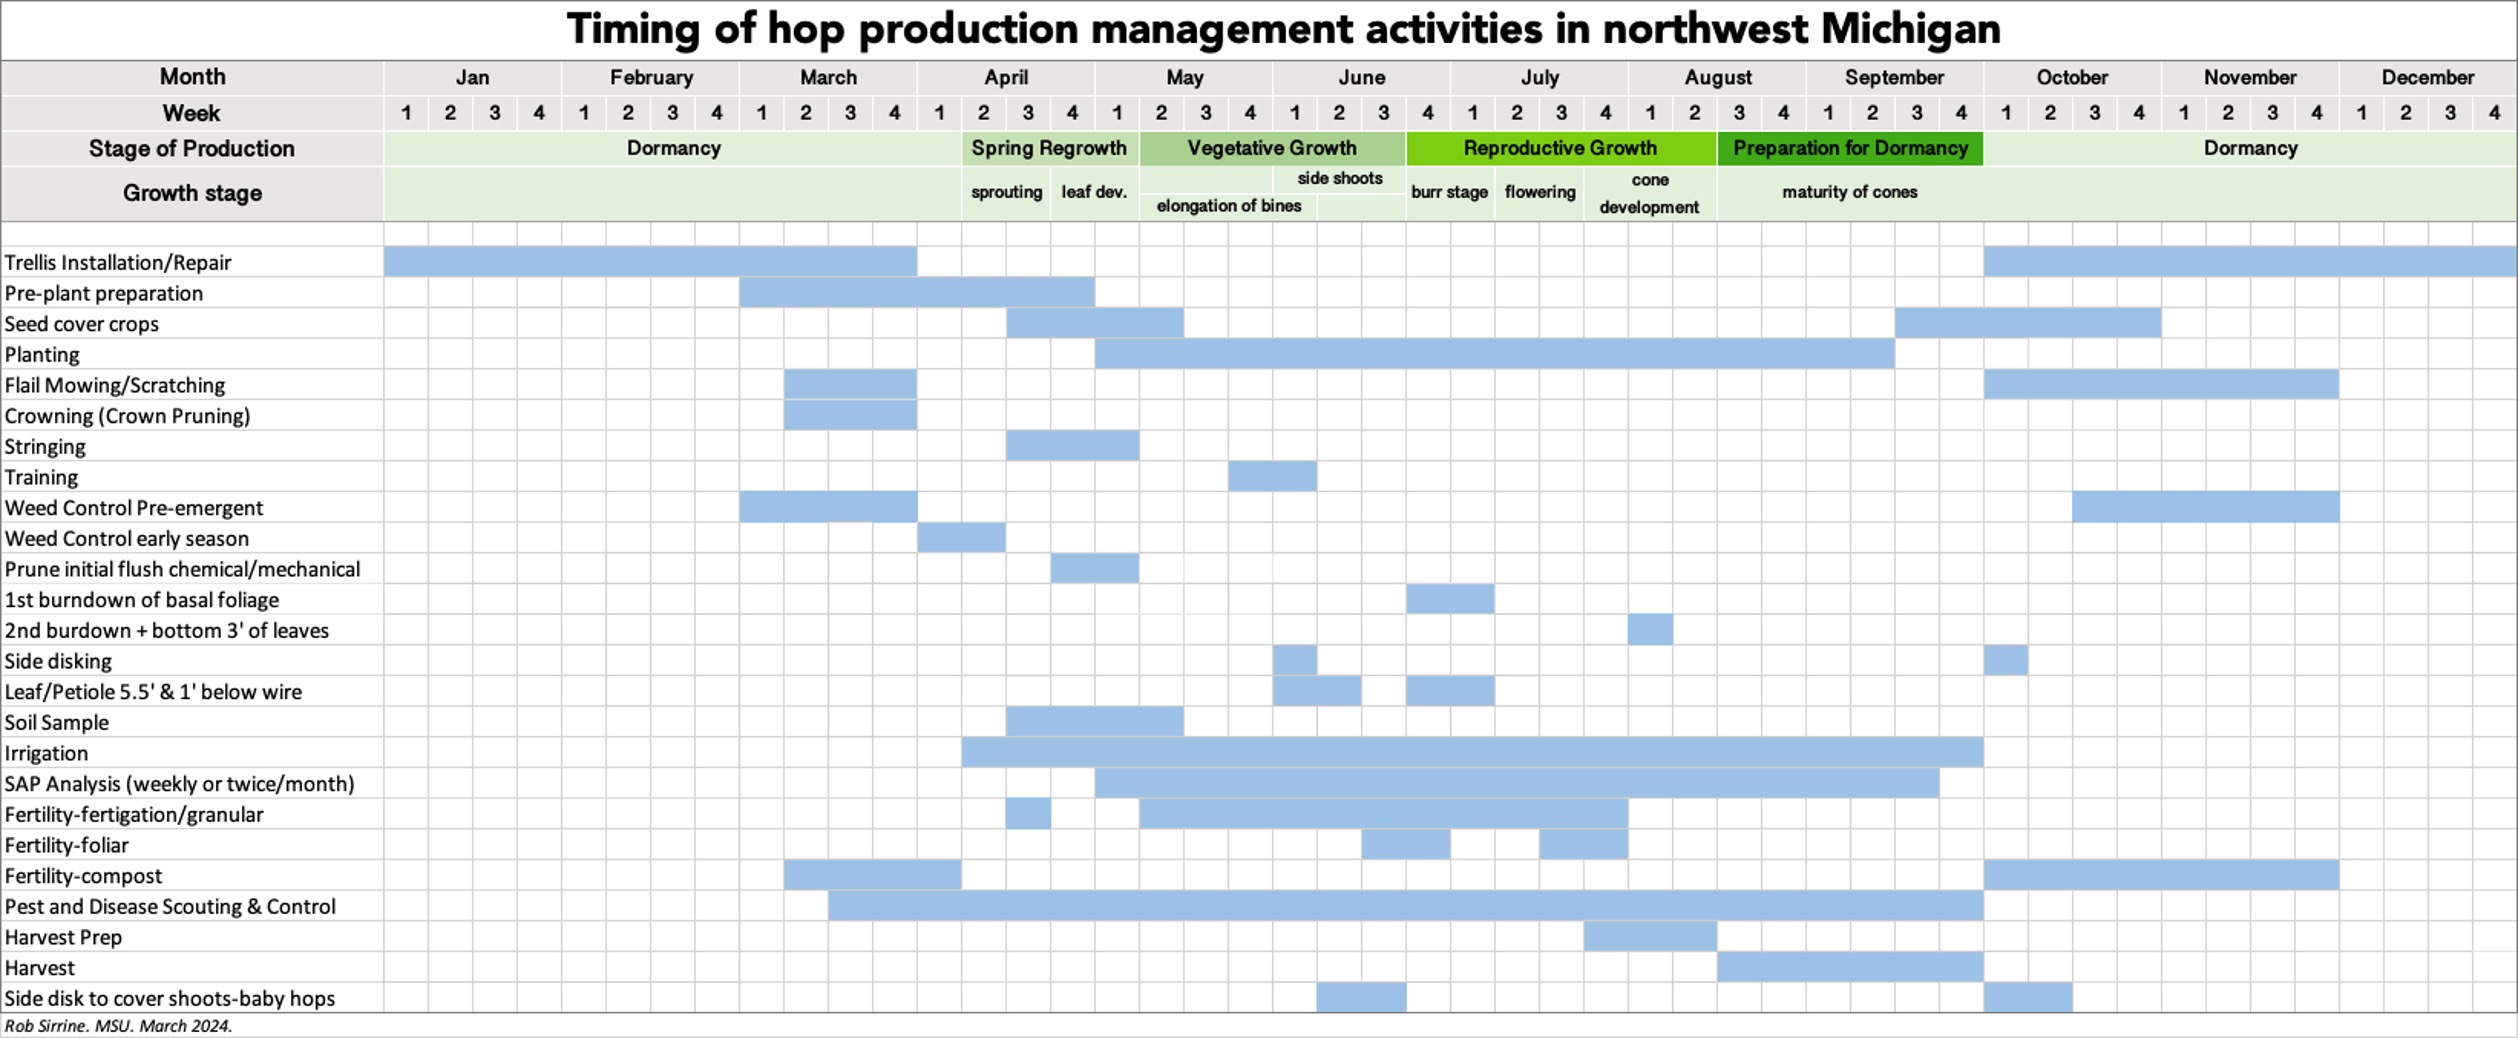 A chart showing the timing of hop management activities.